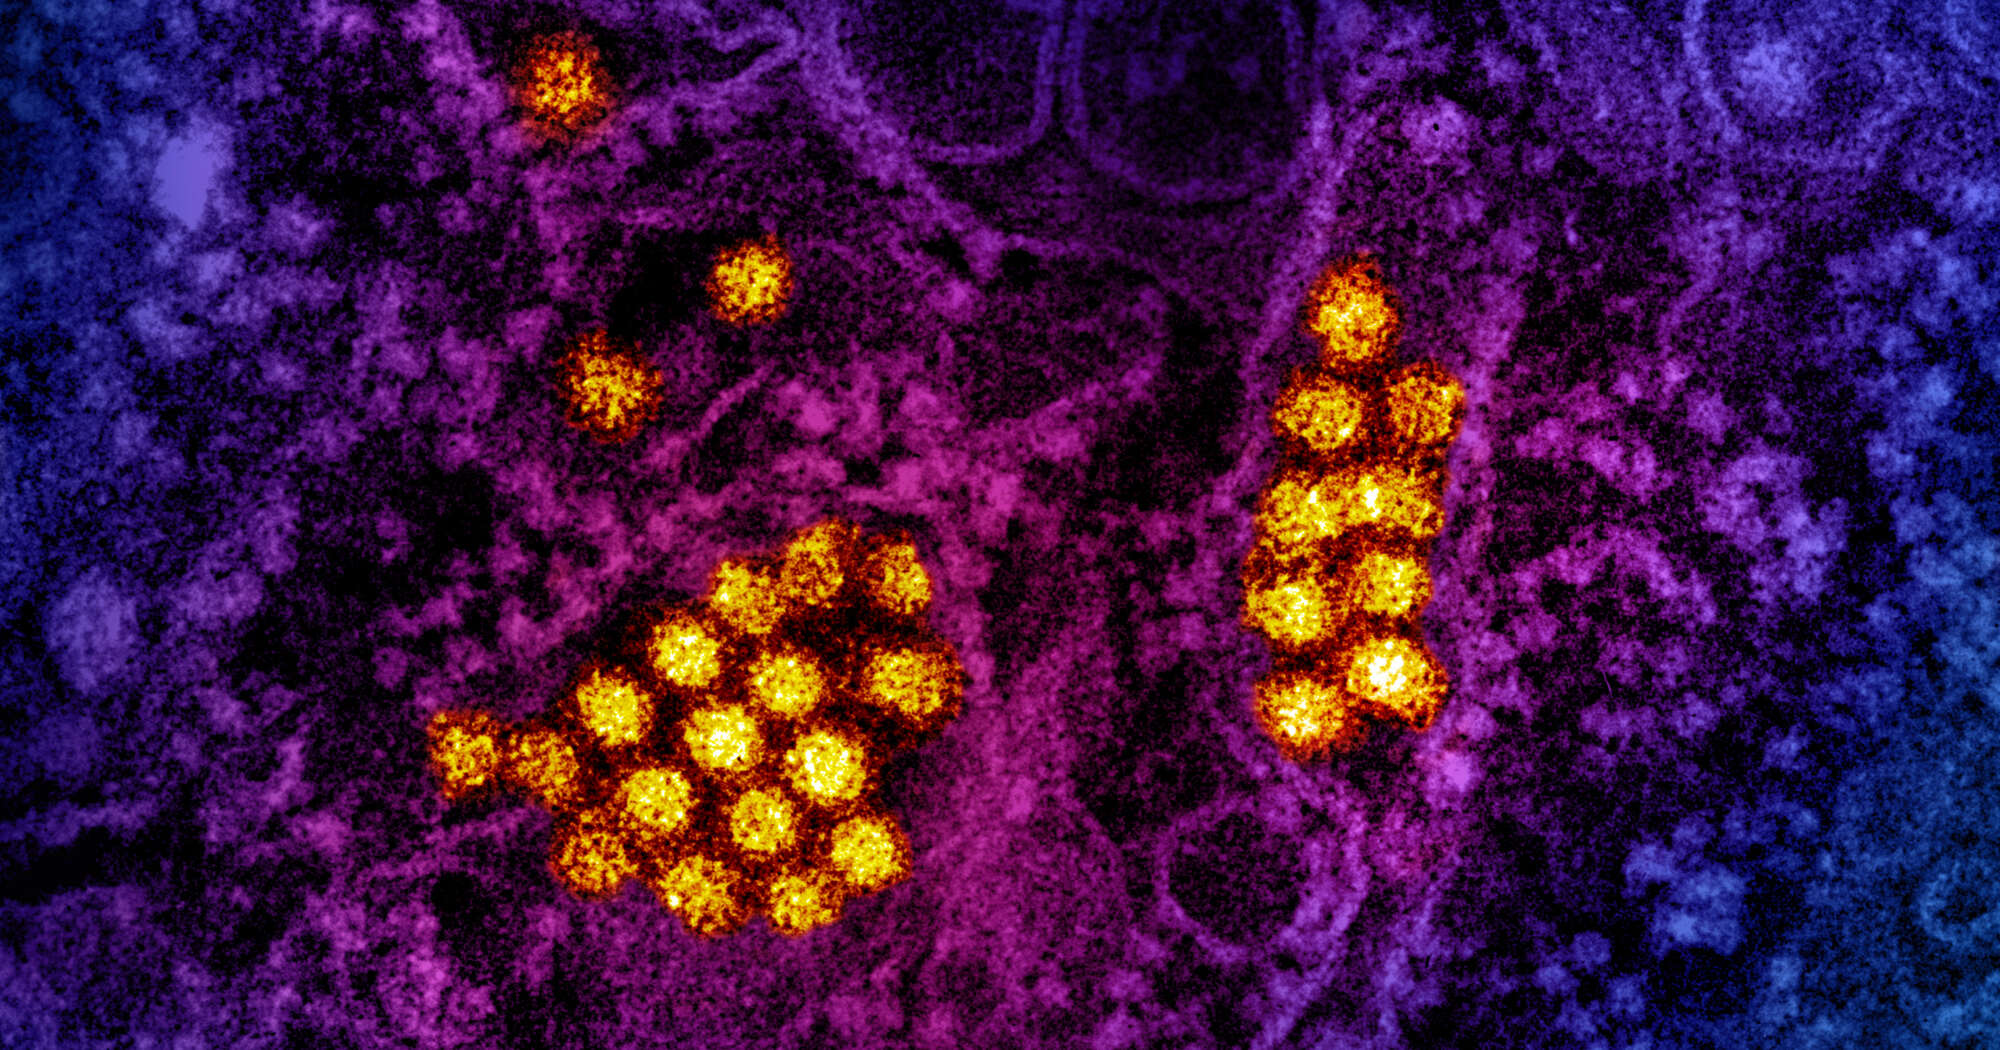 ransmission electron micrograph of dengue virus particles (gold). Micrograph courtesy of CDC; colorization and visual effects by NIAID © CDC and NIAID